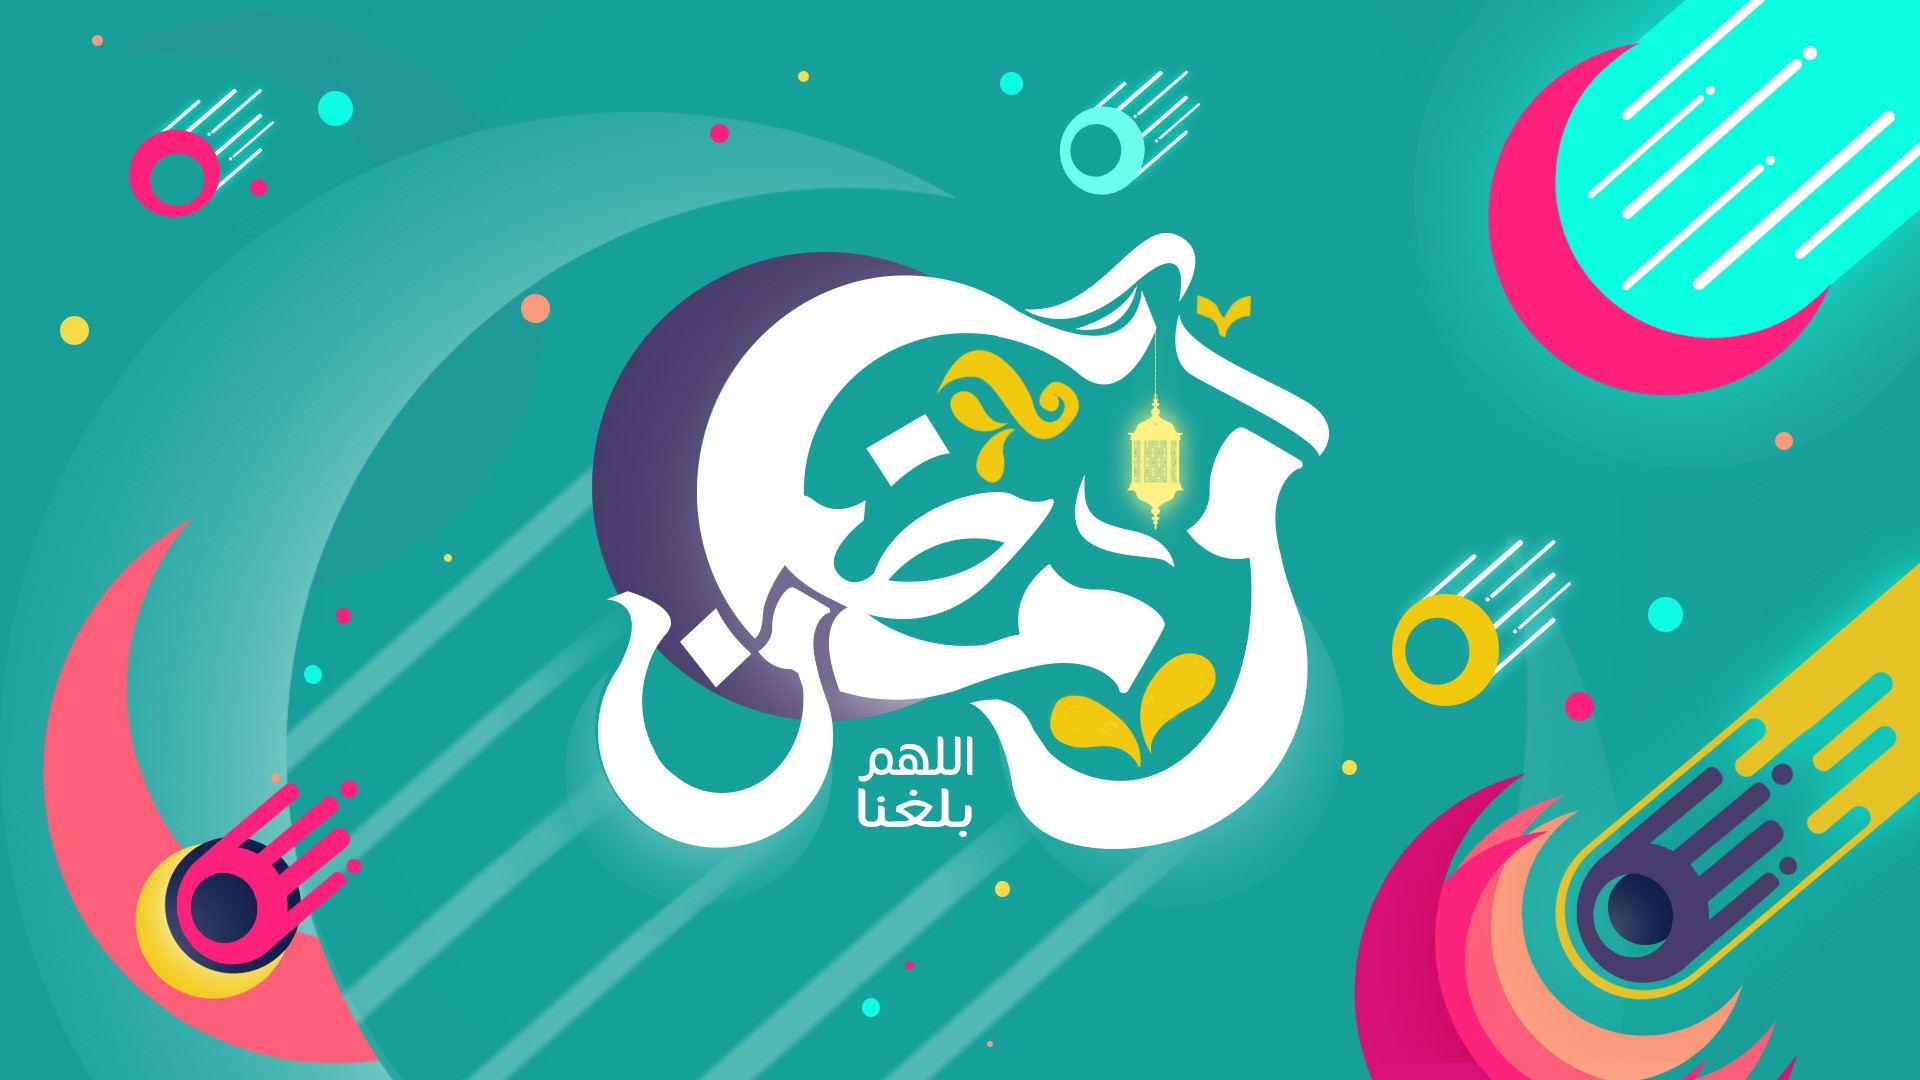 Ramadan greetings wallpapers cards and typography